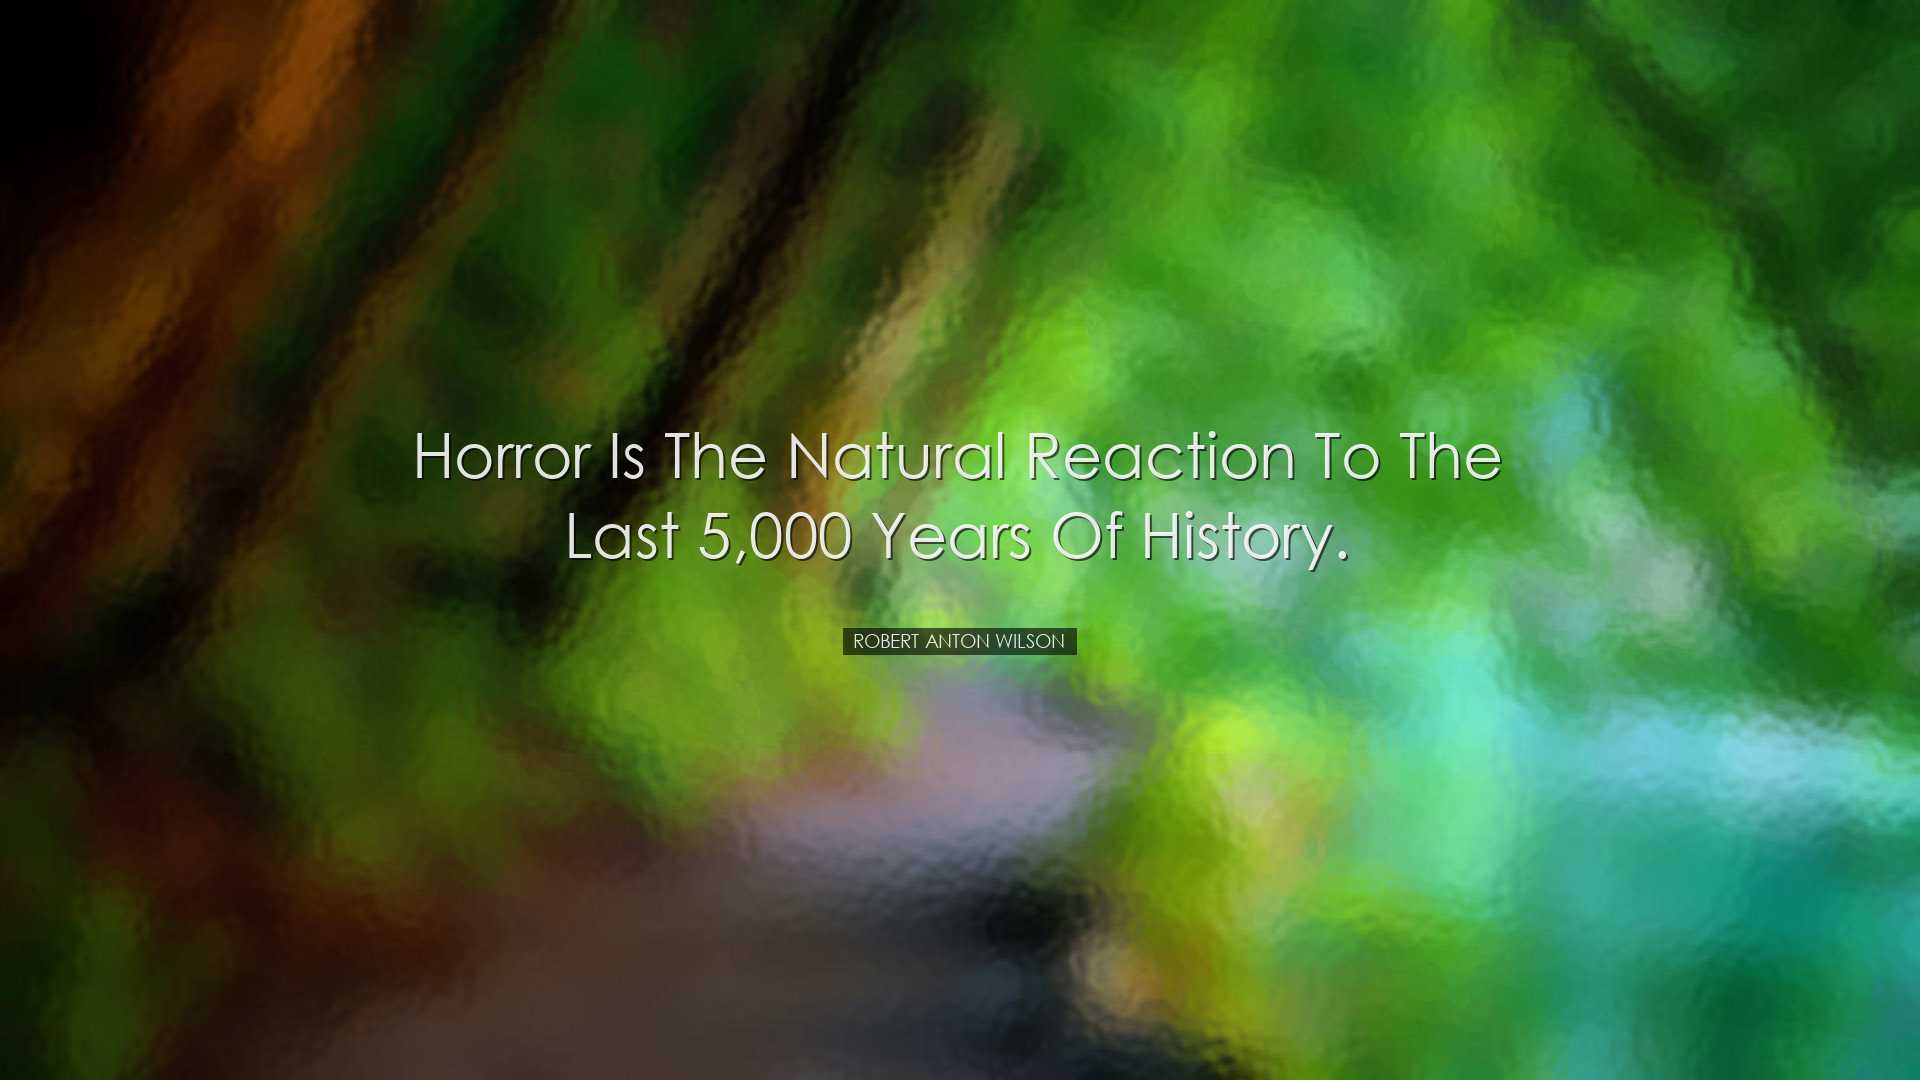 Horror is the natural reaction to the last 5,000 years of history.